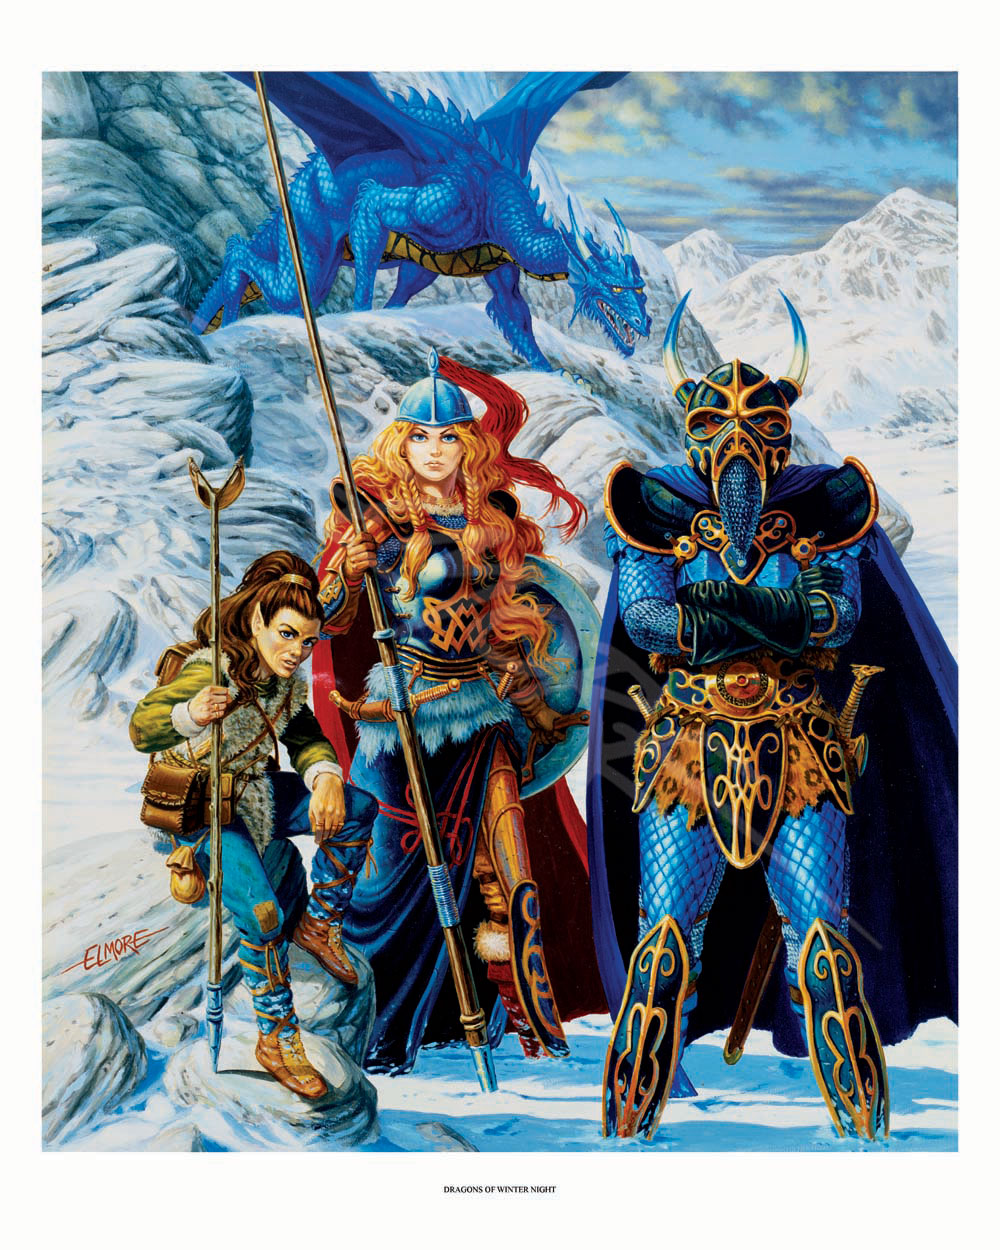 Margaret Weis and Tracy Hickman - Dragons of Winter Night, 1985